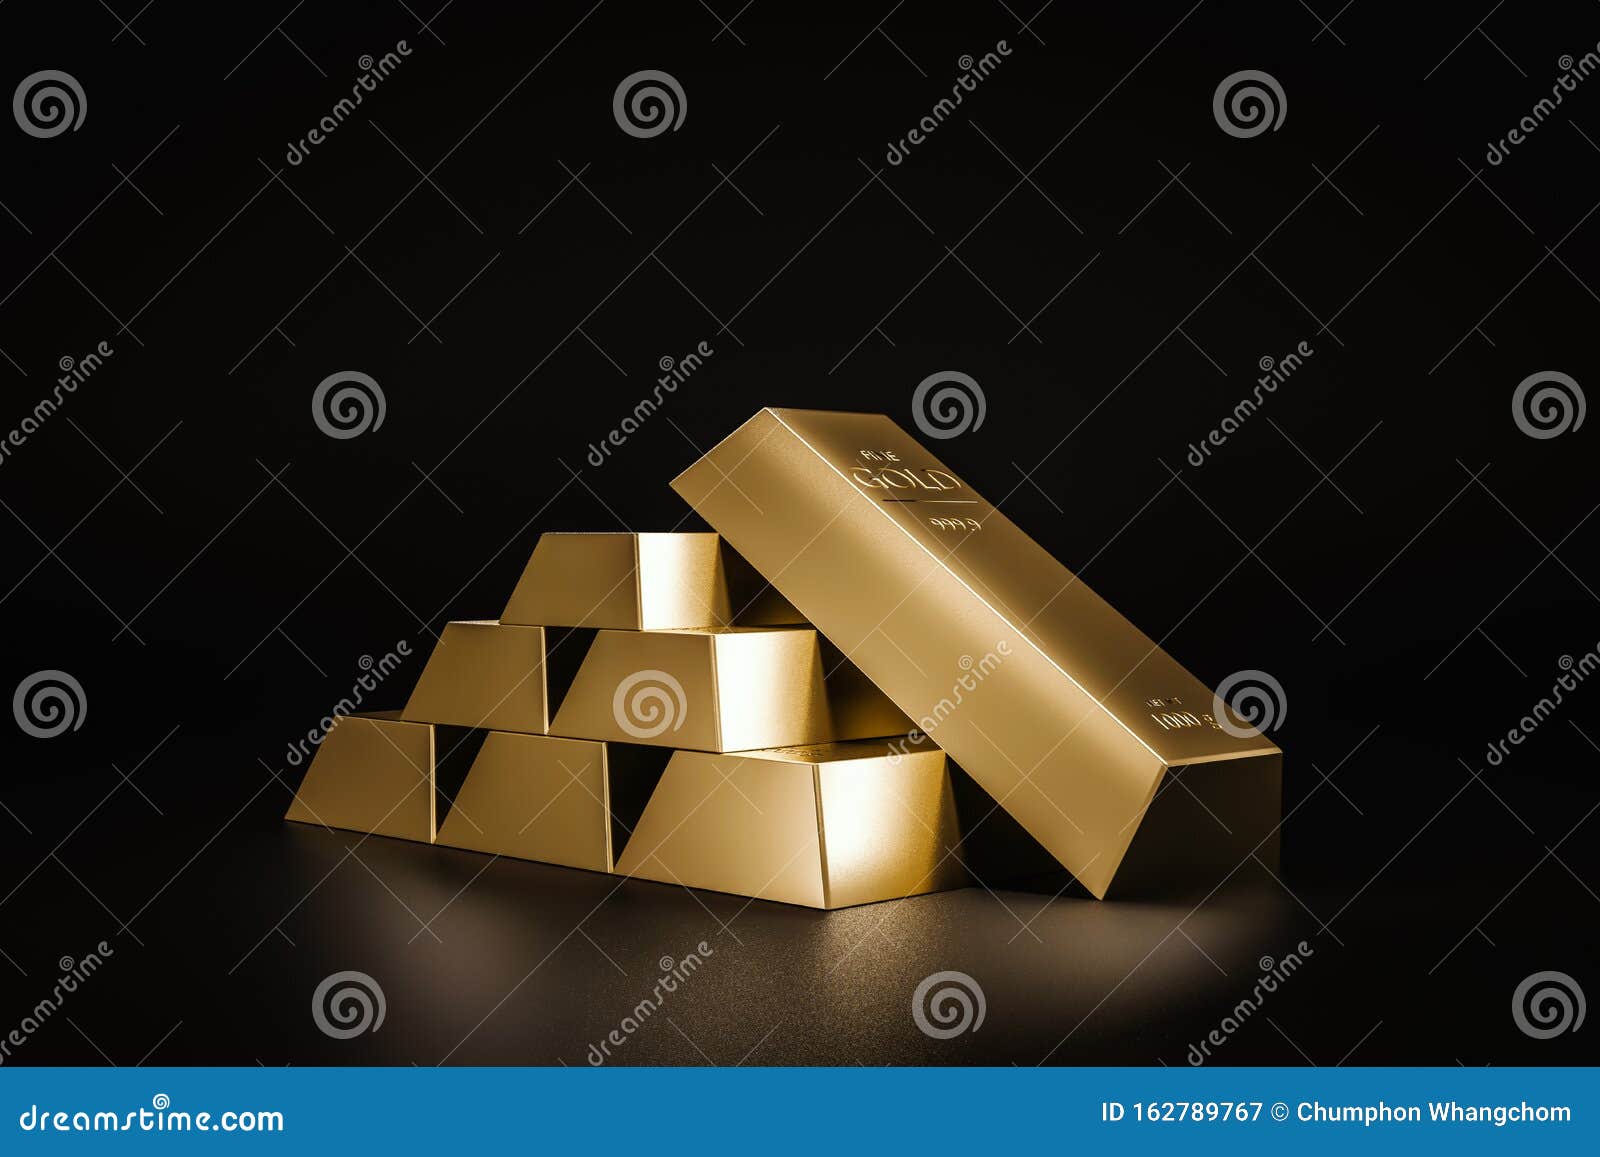 stack of gold bars on dark background of wealth from trading profits of fast growing businesses. contracting profit in stock